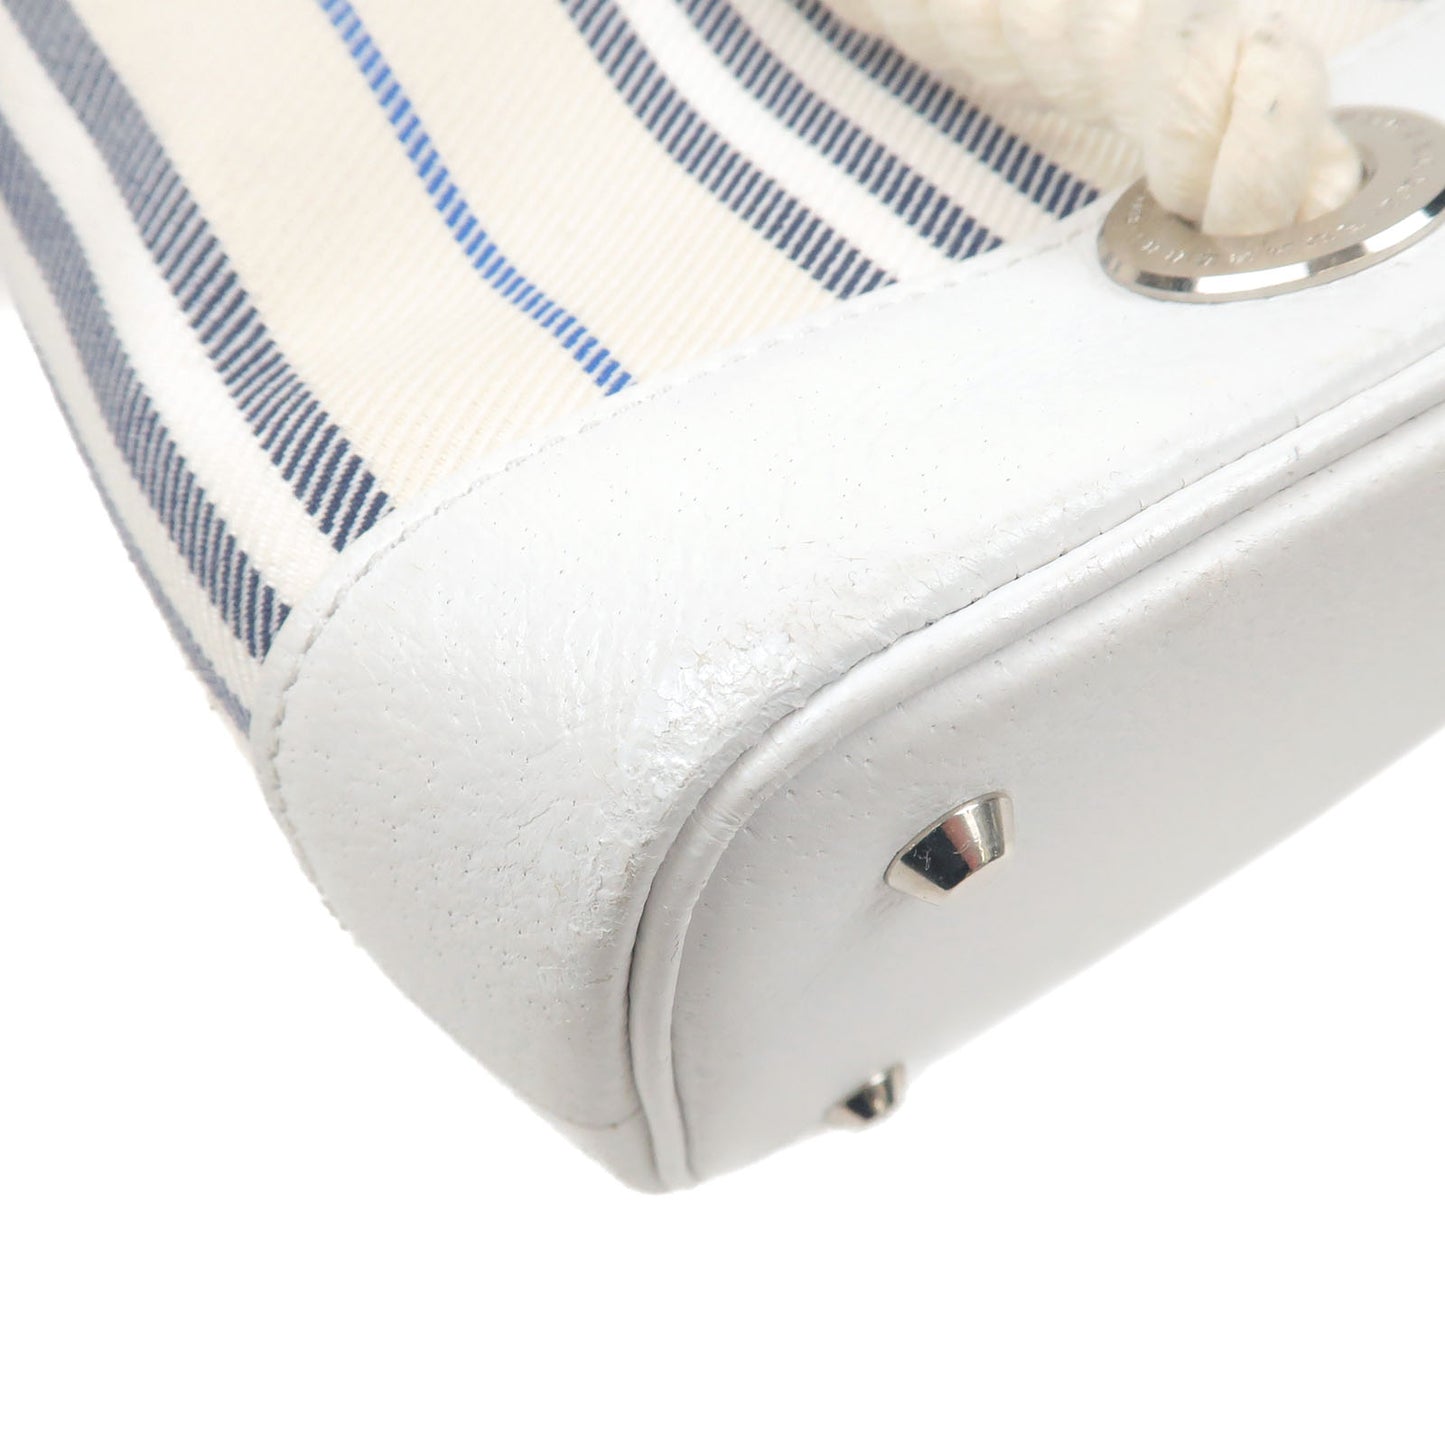 BURBERRY Stripe Canvas Leather Hand Bag Ivory White